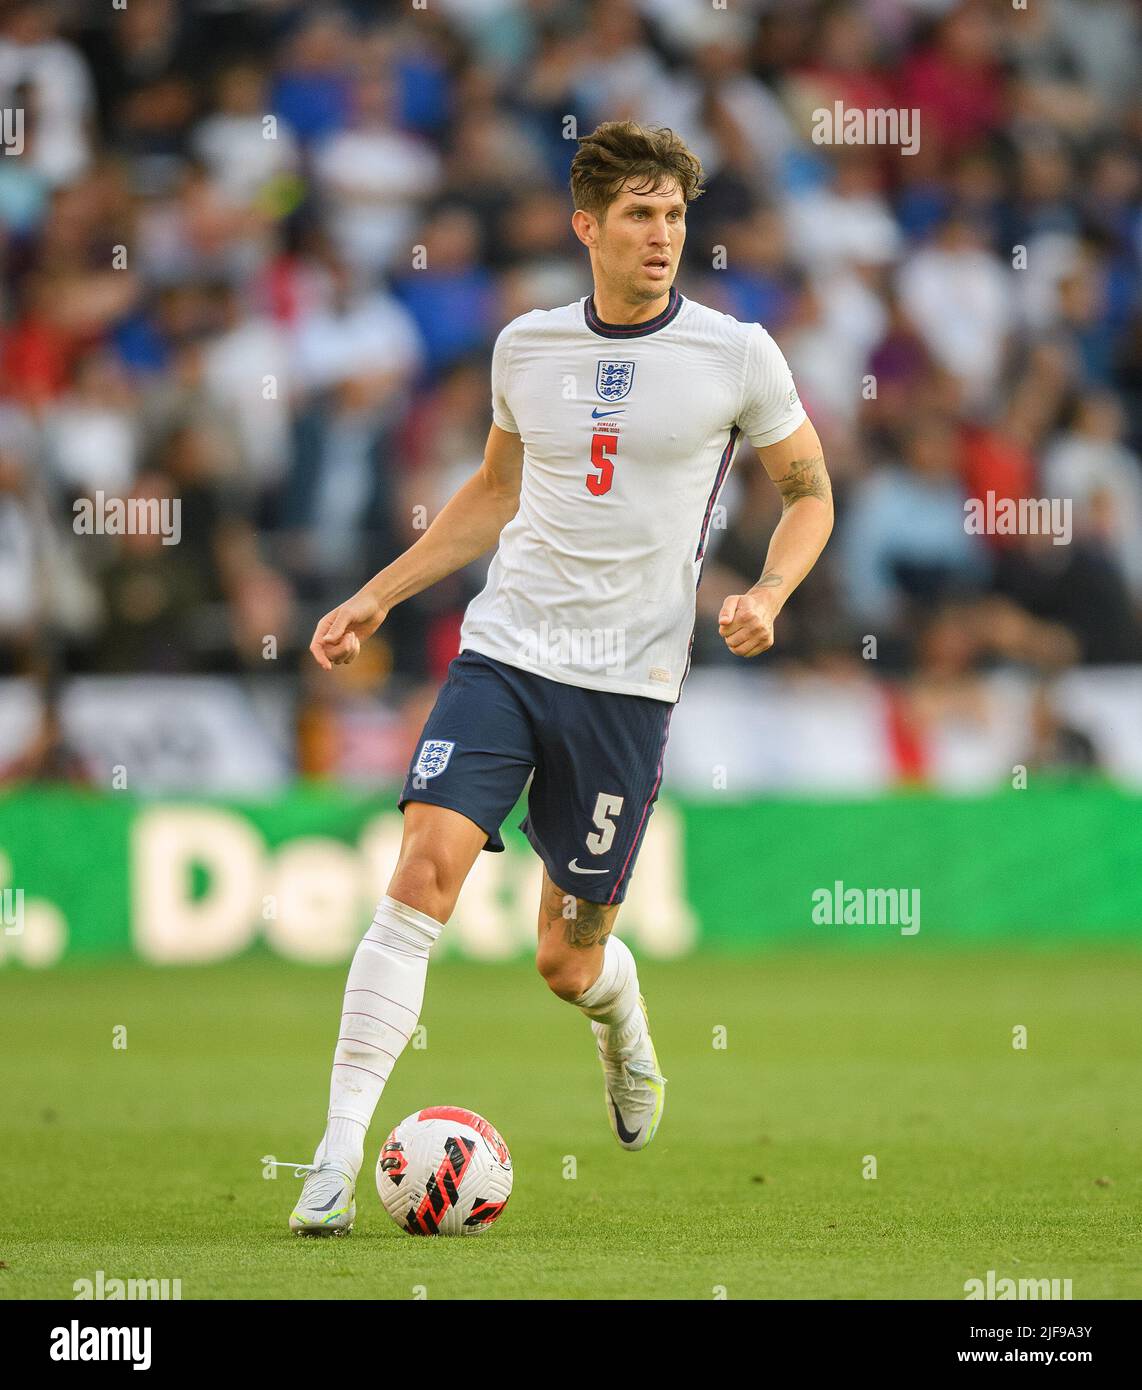 England v Hungary - UEFA Nations League. 14/6/22. John Stones during the Nations League match against Hungary. Pic : Mark Pain / Alamy. Stock Photo